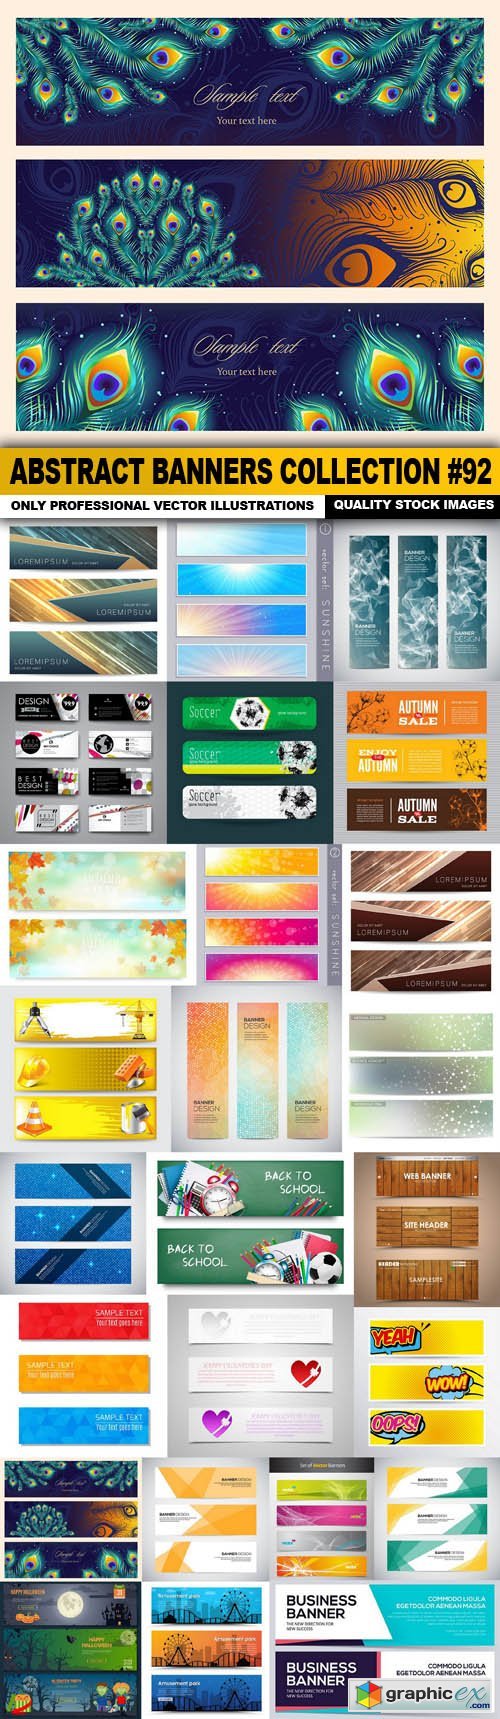 Abstract Banners Collection #92 - 25 Vectors